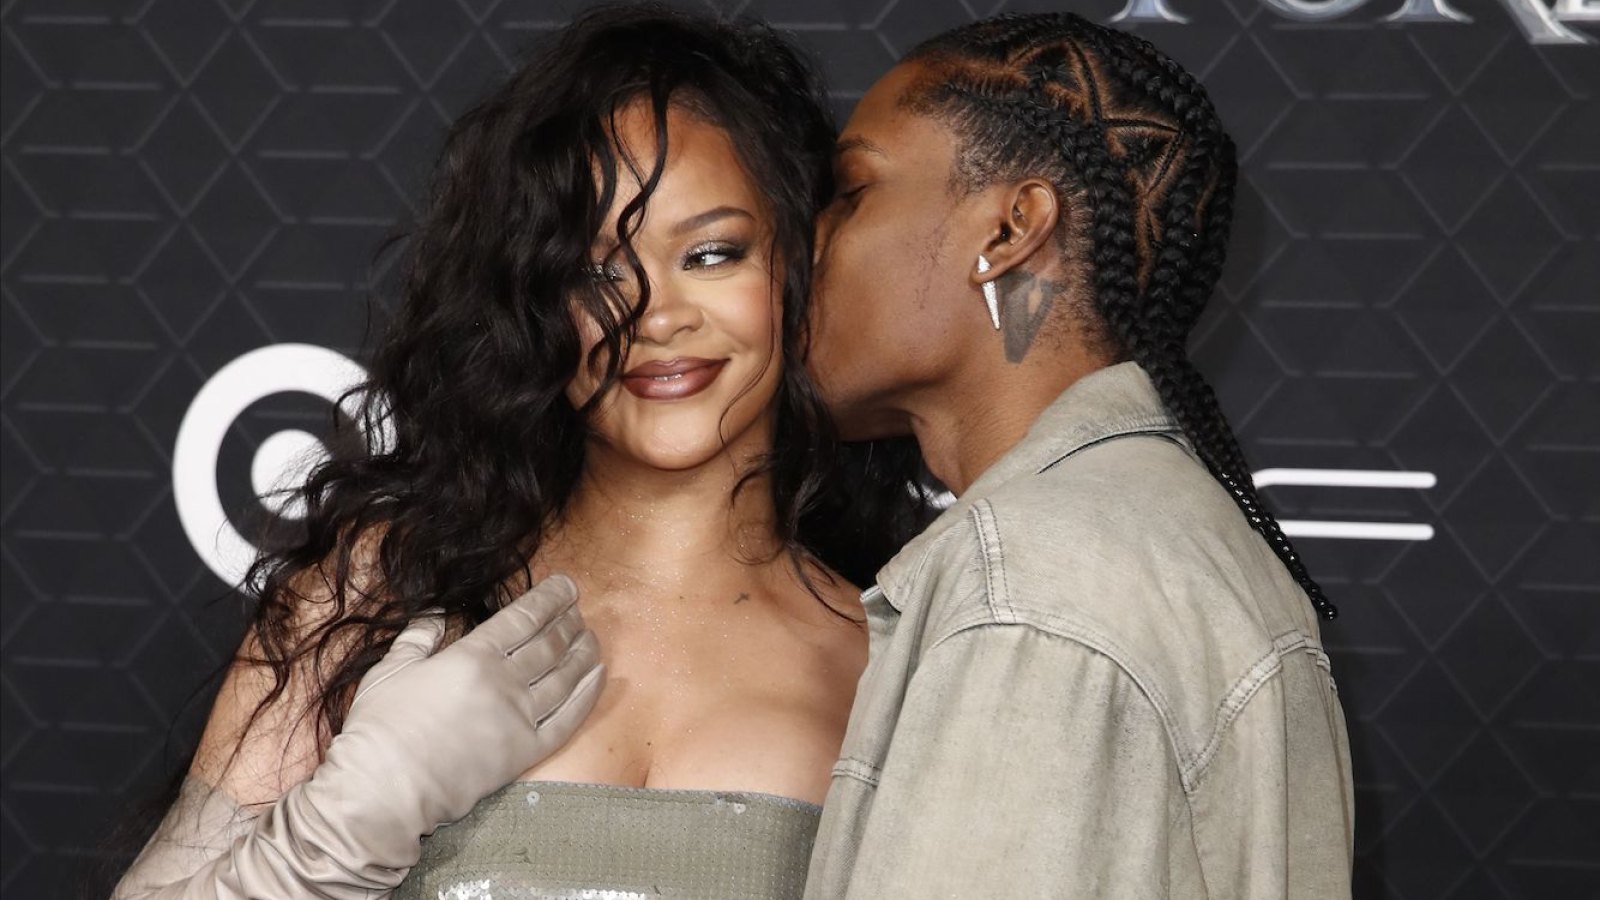 Rihanna and A$AP Rocky at 'Black Panther: Wakanda Forever' premiere